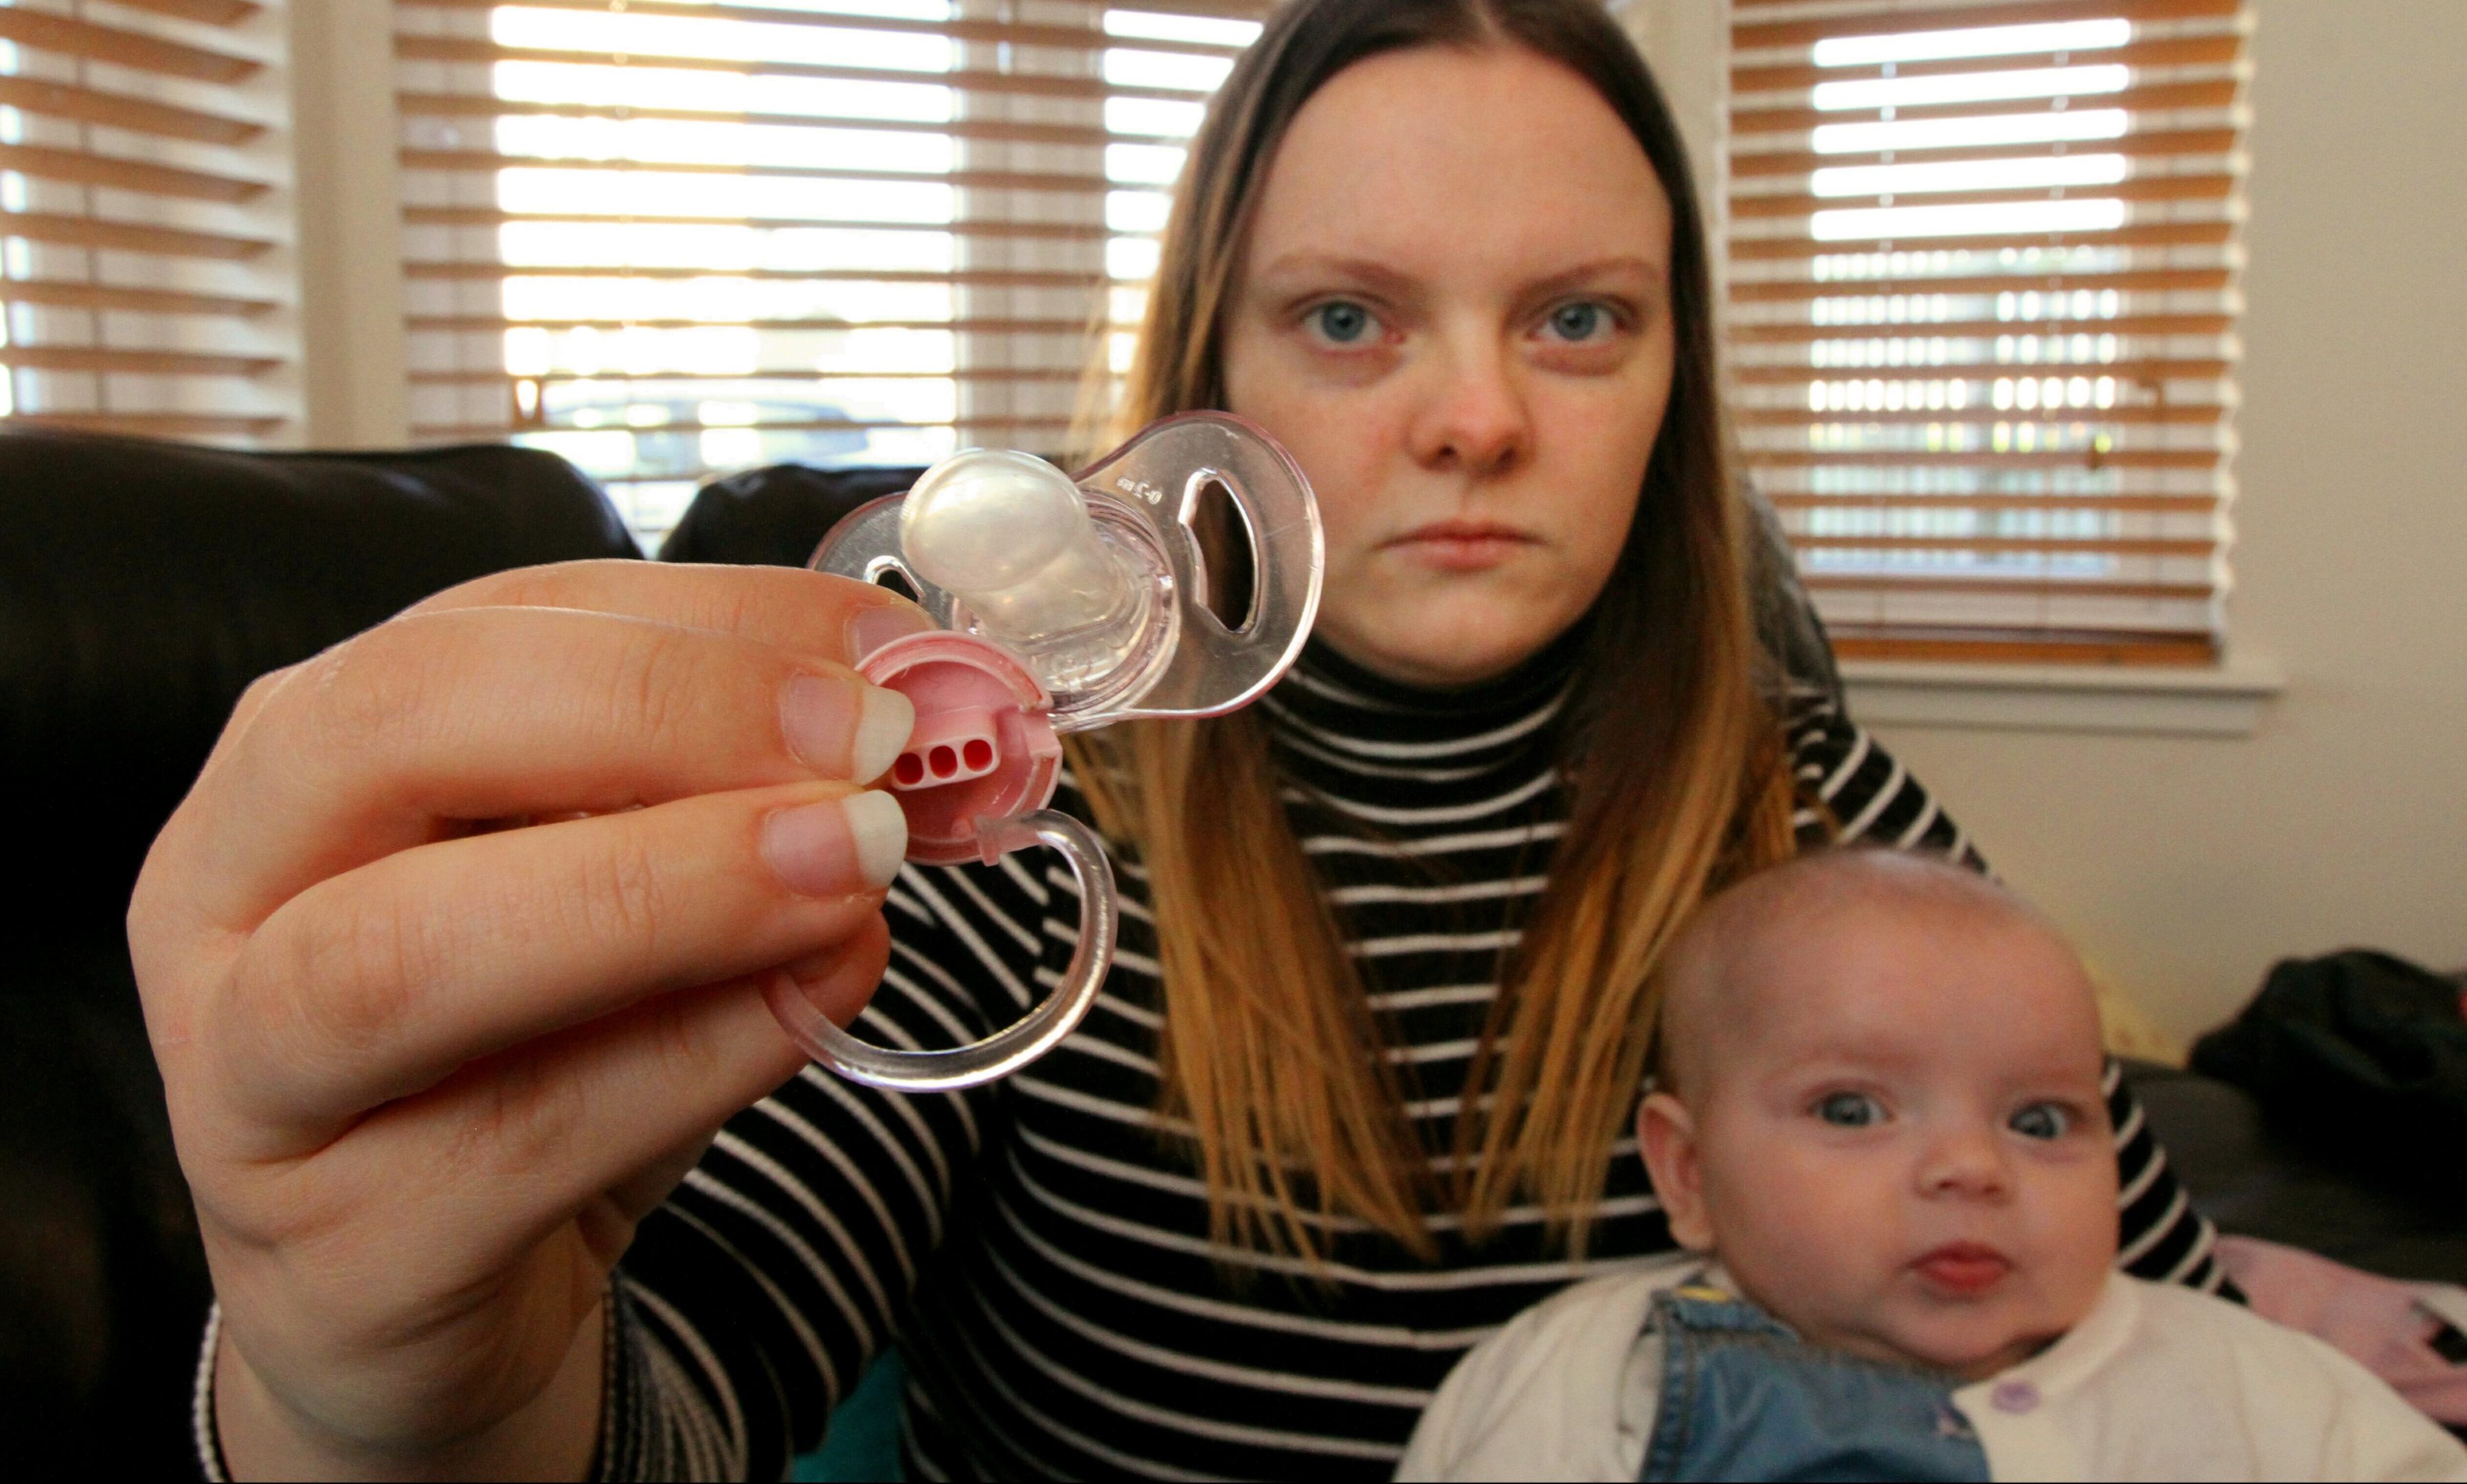 Louise says her daughter Lara could have choked on the dummy.